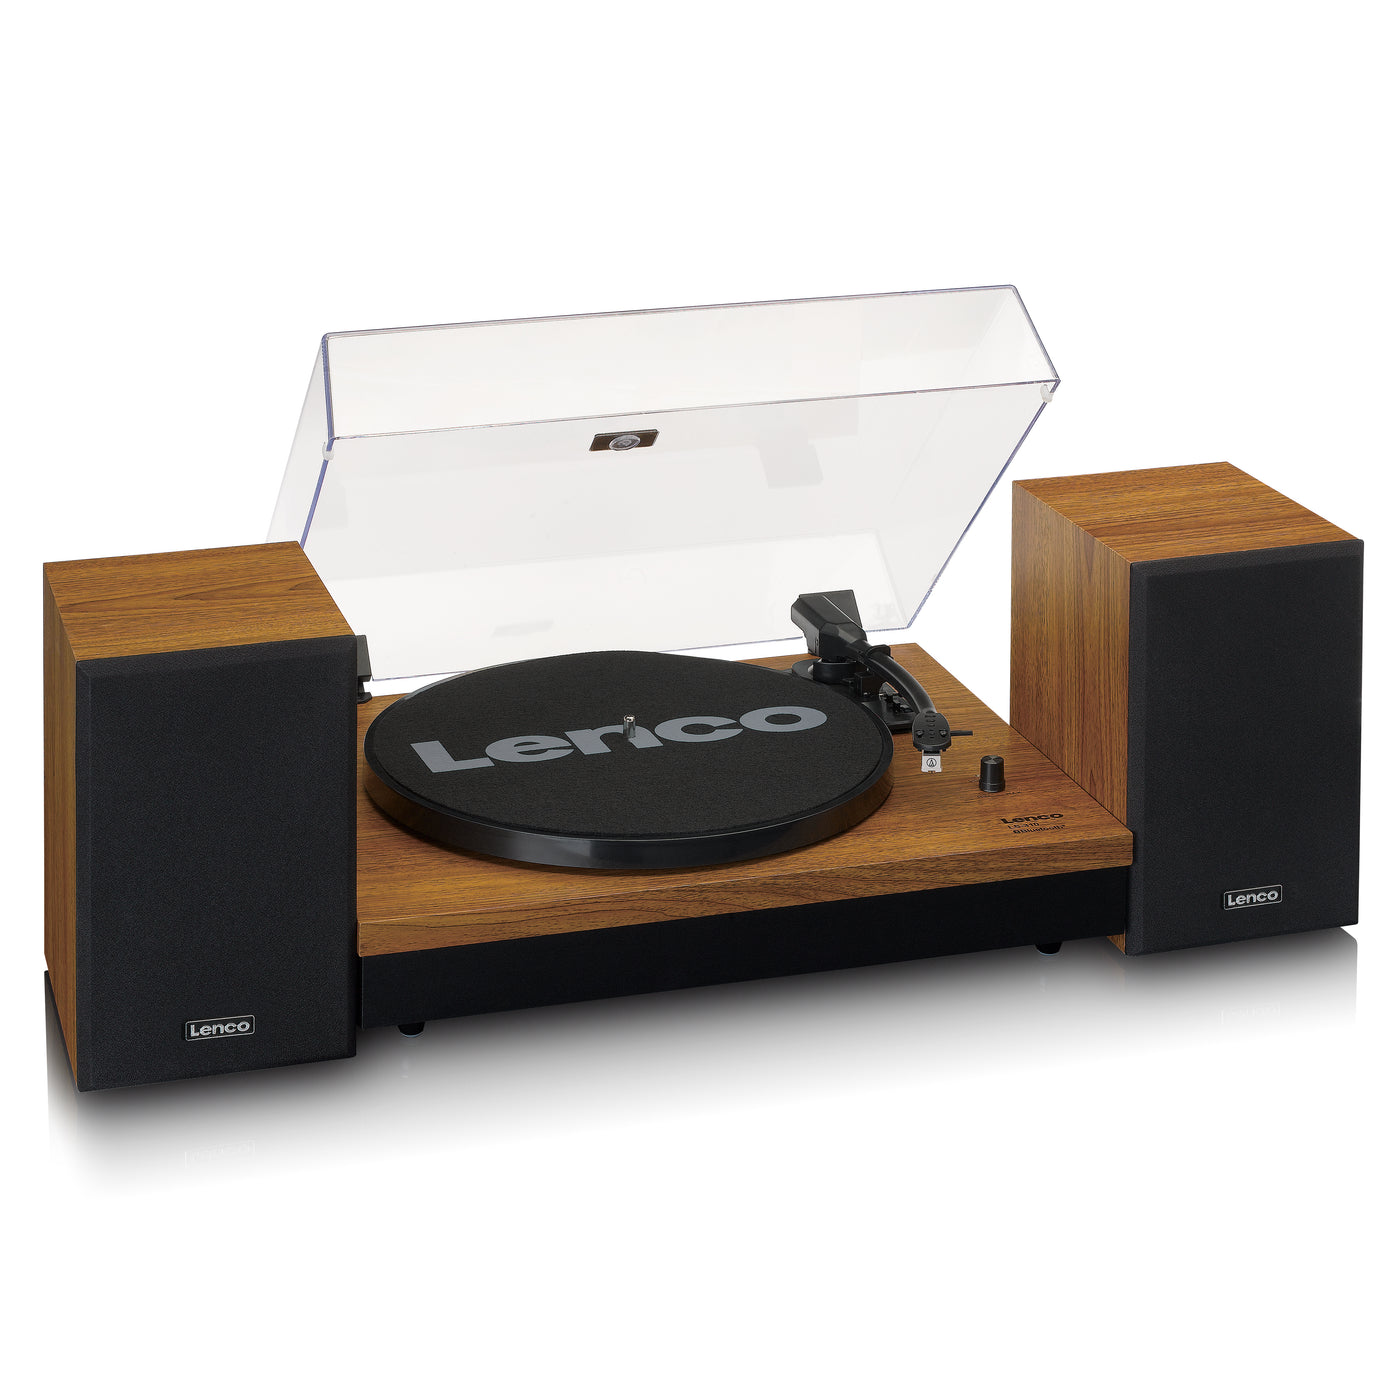 LENCO Lenco-Catalog - LS-310WD speakers, – Turntable two and with Bluetooth® separate